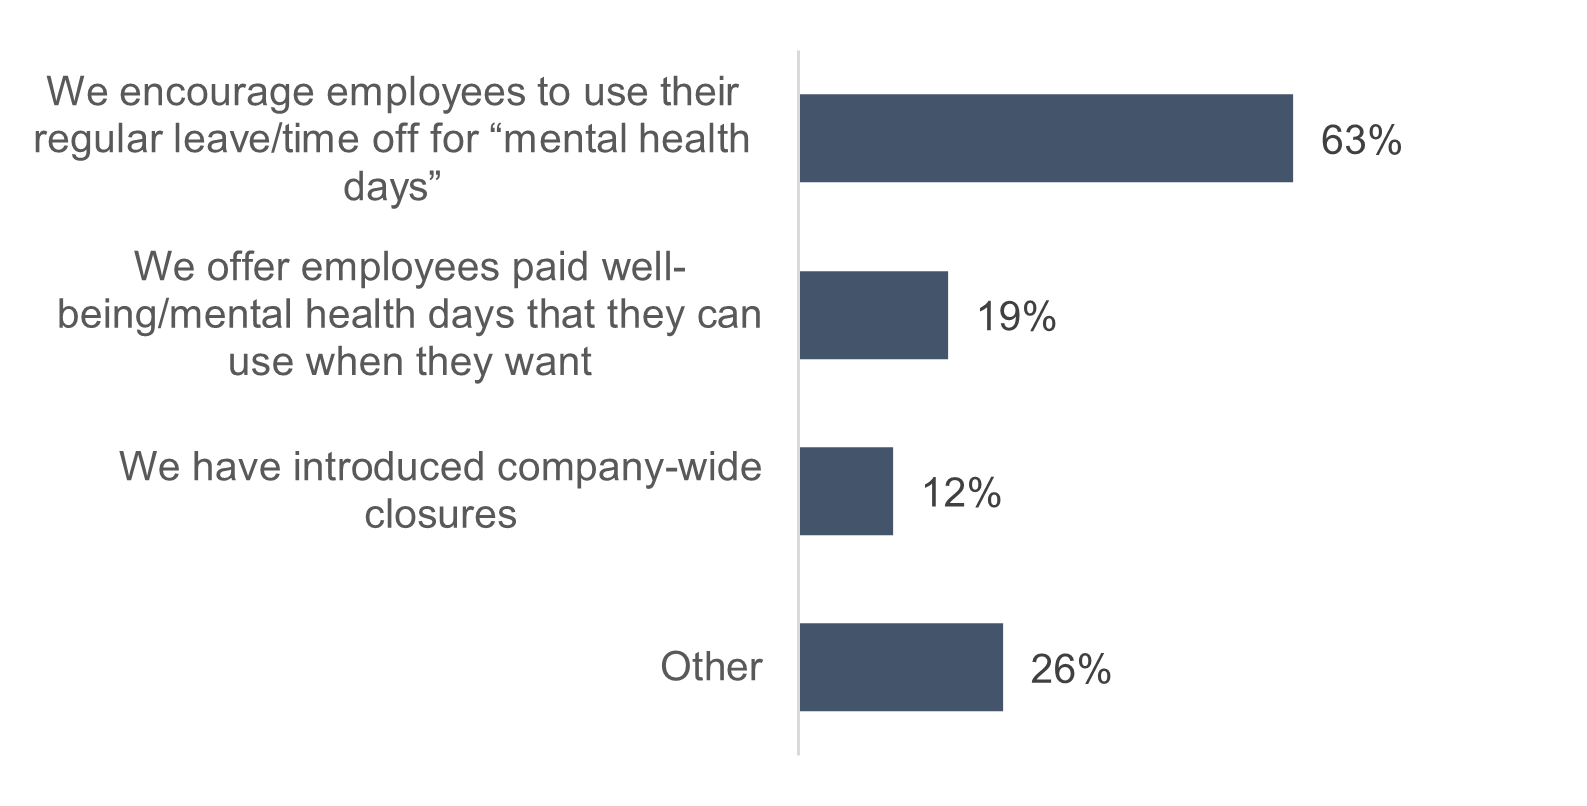 Large Employers’ Paid Time Off or Company Closures for Mental Health, 2022